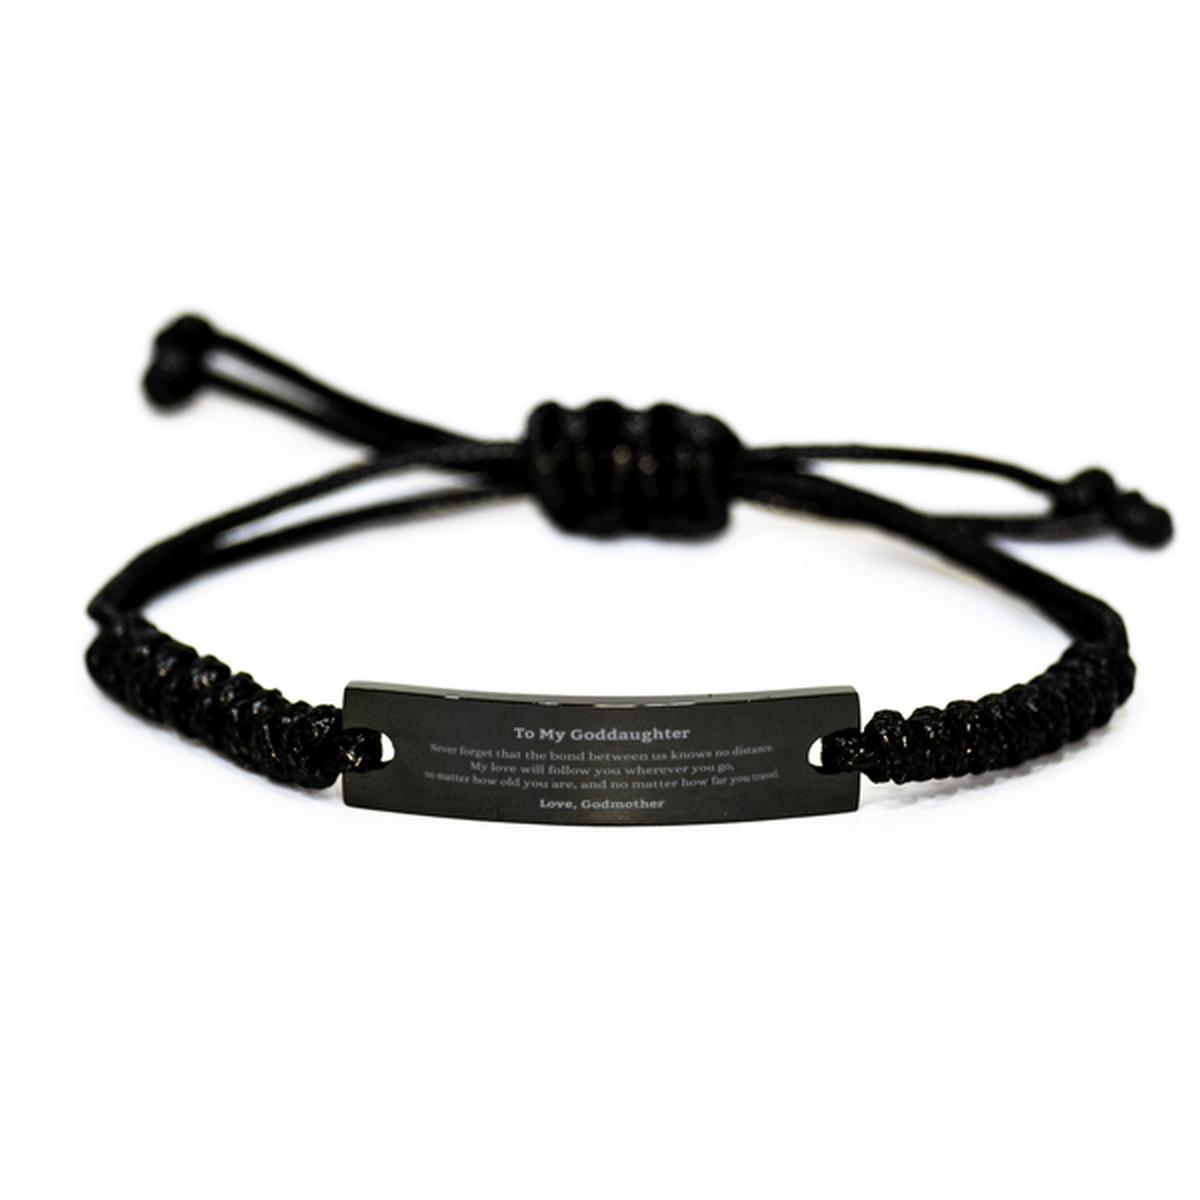 Goddaughter Birthday Gifts from Godmother, Adjustable Black Rope Bracelet for Goddaughter Christmas Graduation Unique Gifts Goddaughter Never forget that the bond between us knows no distance. Love, Godmother